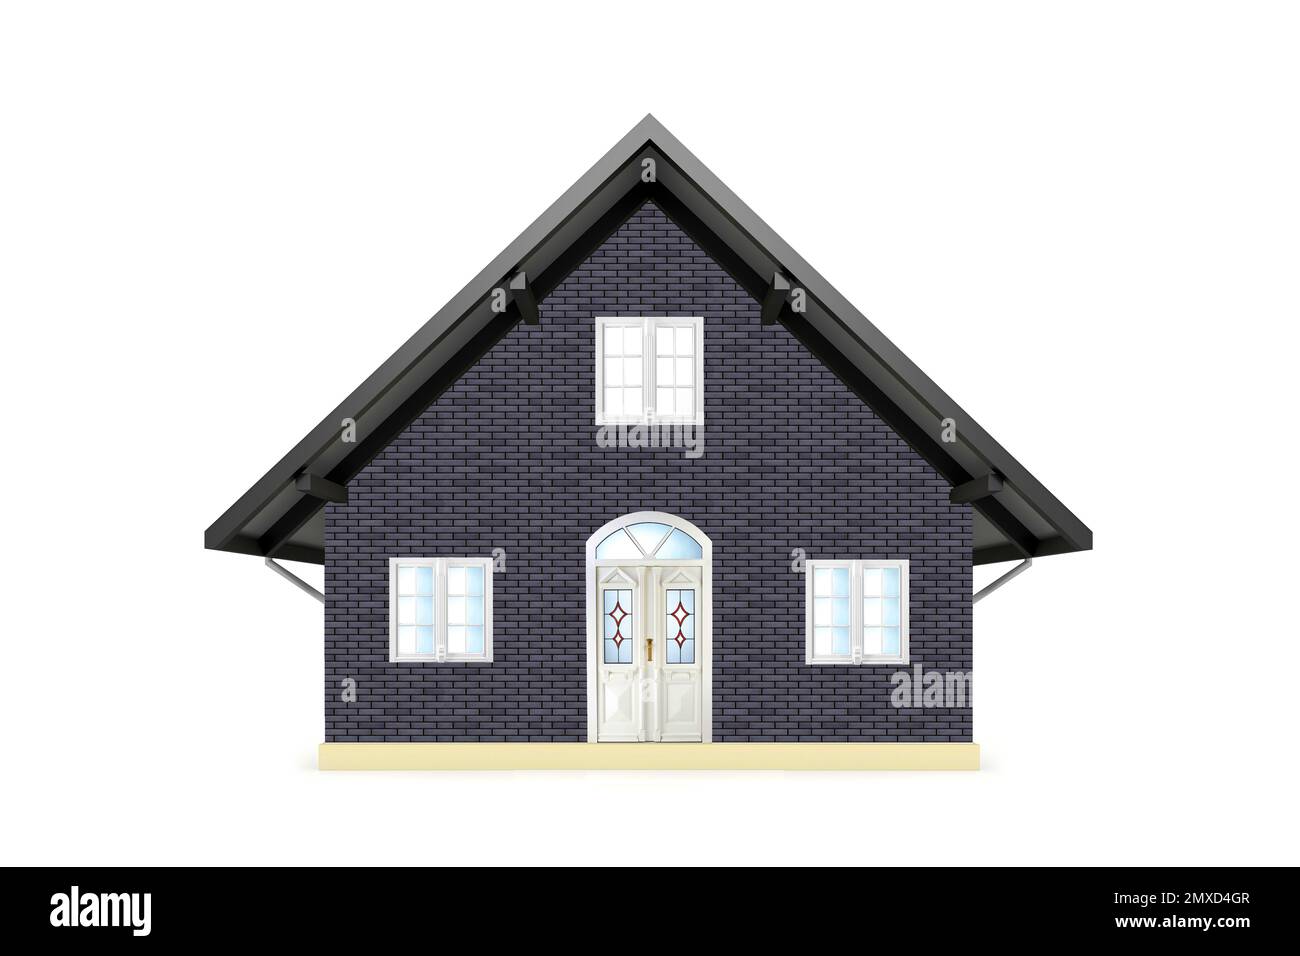 miniature model of a family house Stock Photo